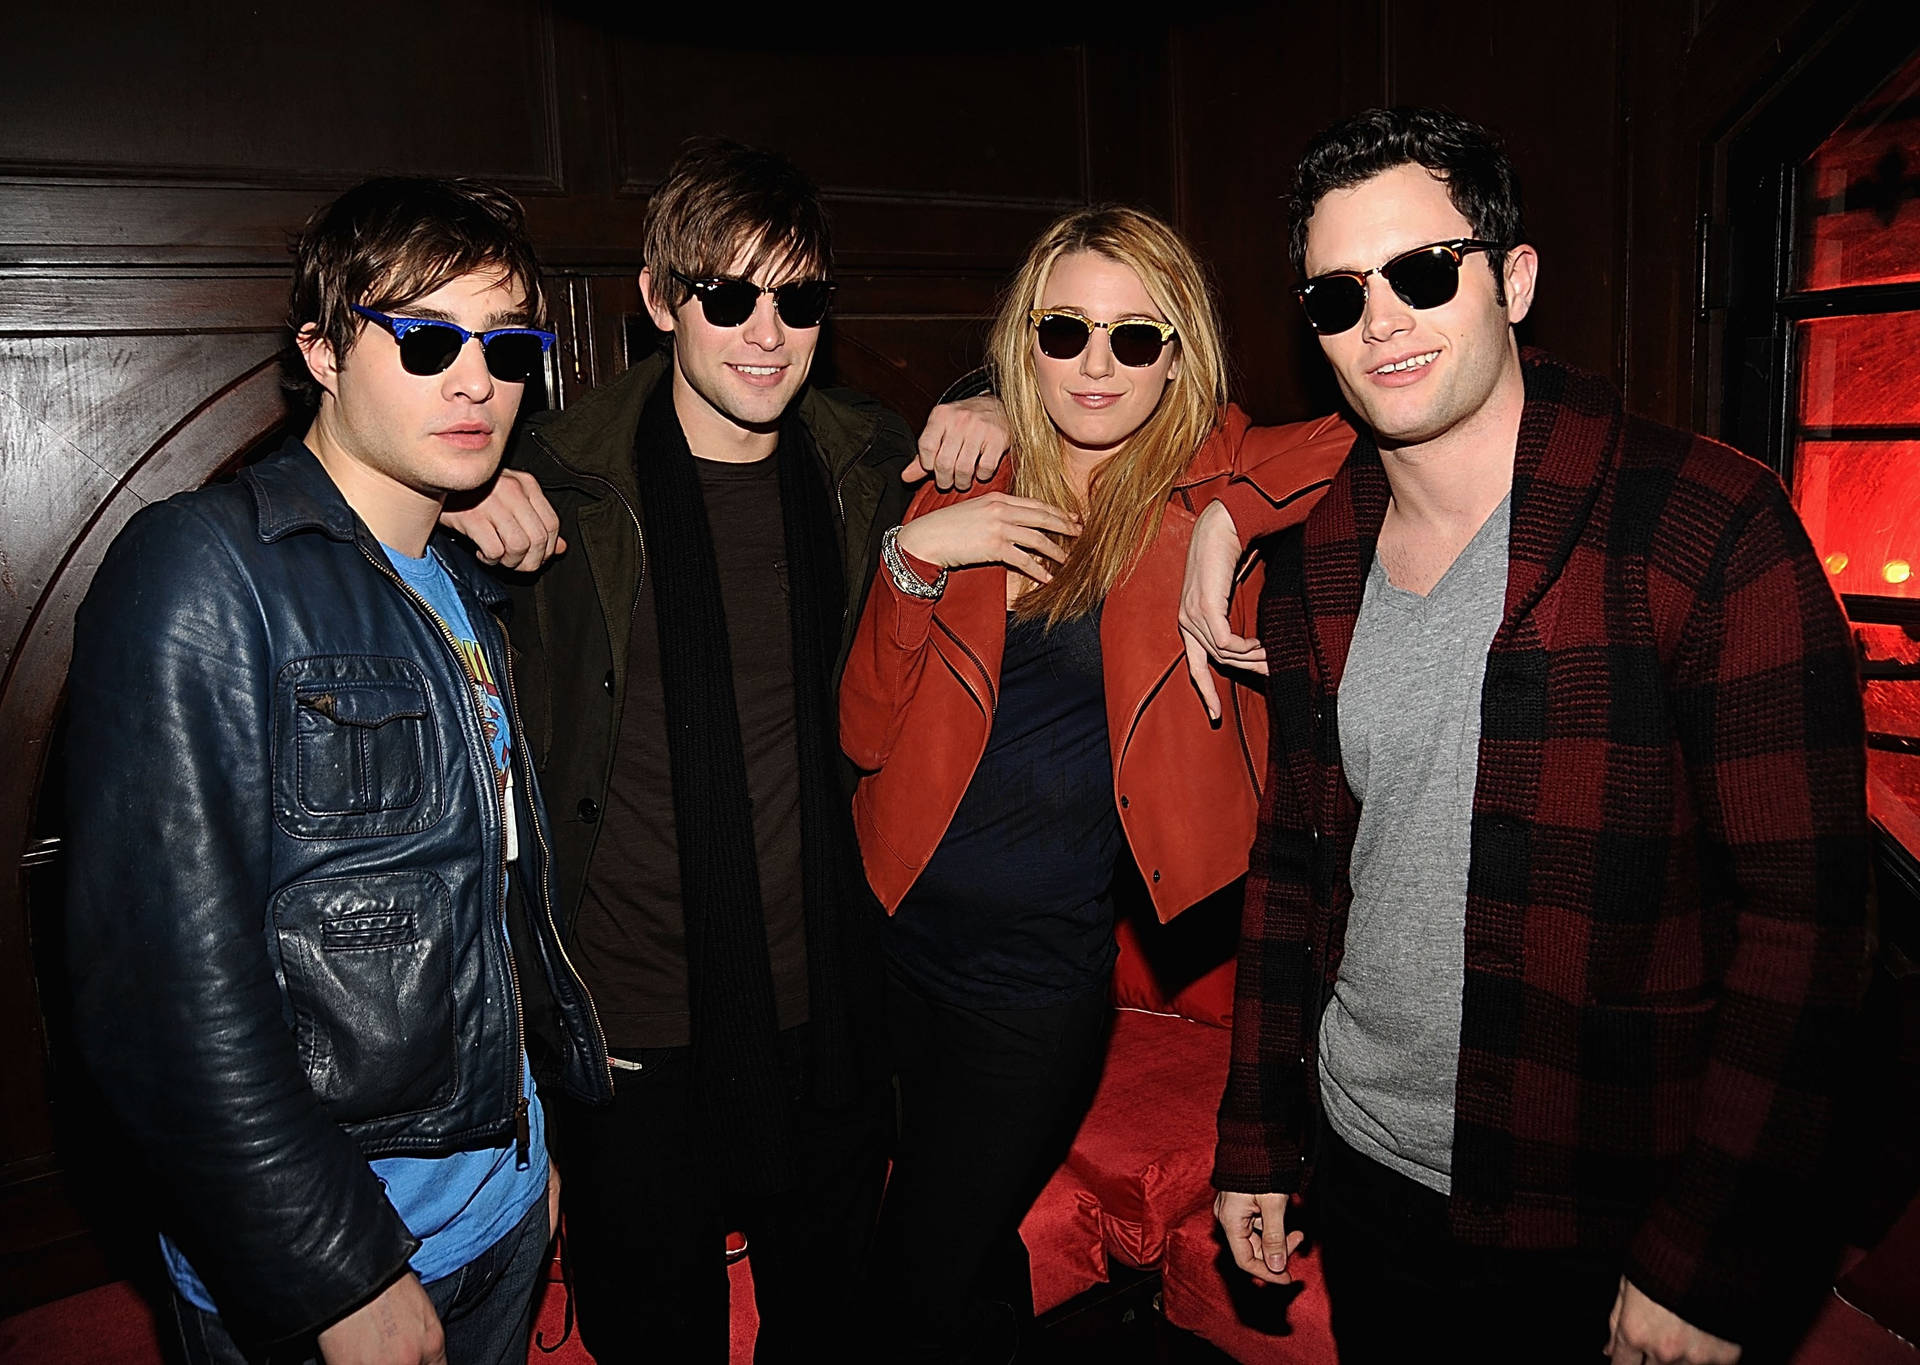 Gossip Girl Cast With Sunglasses Background